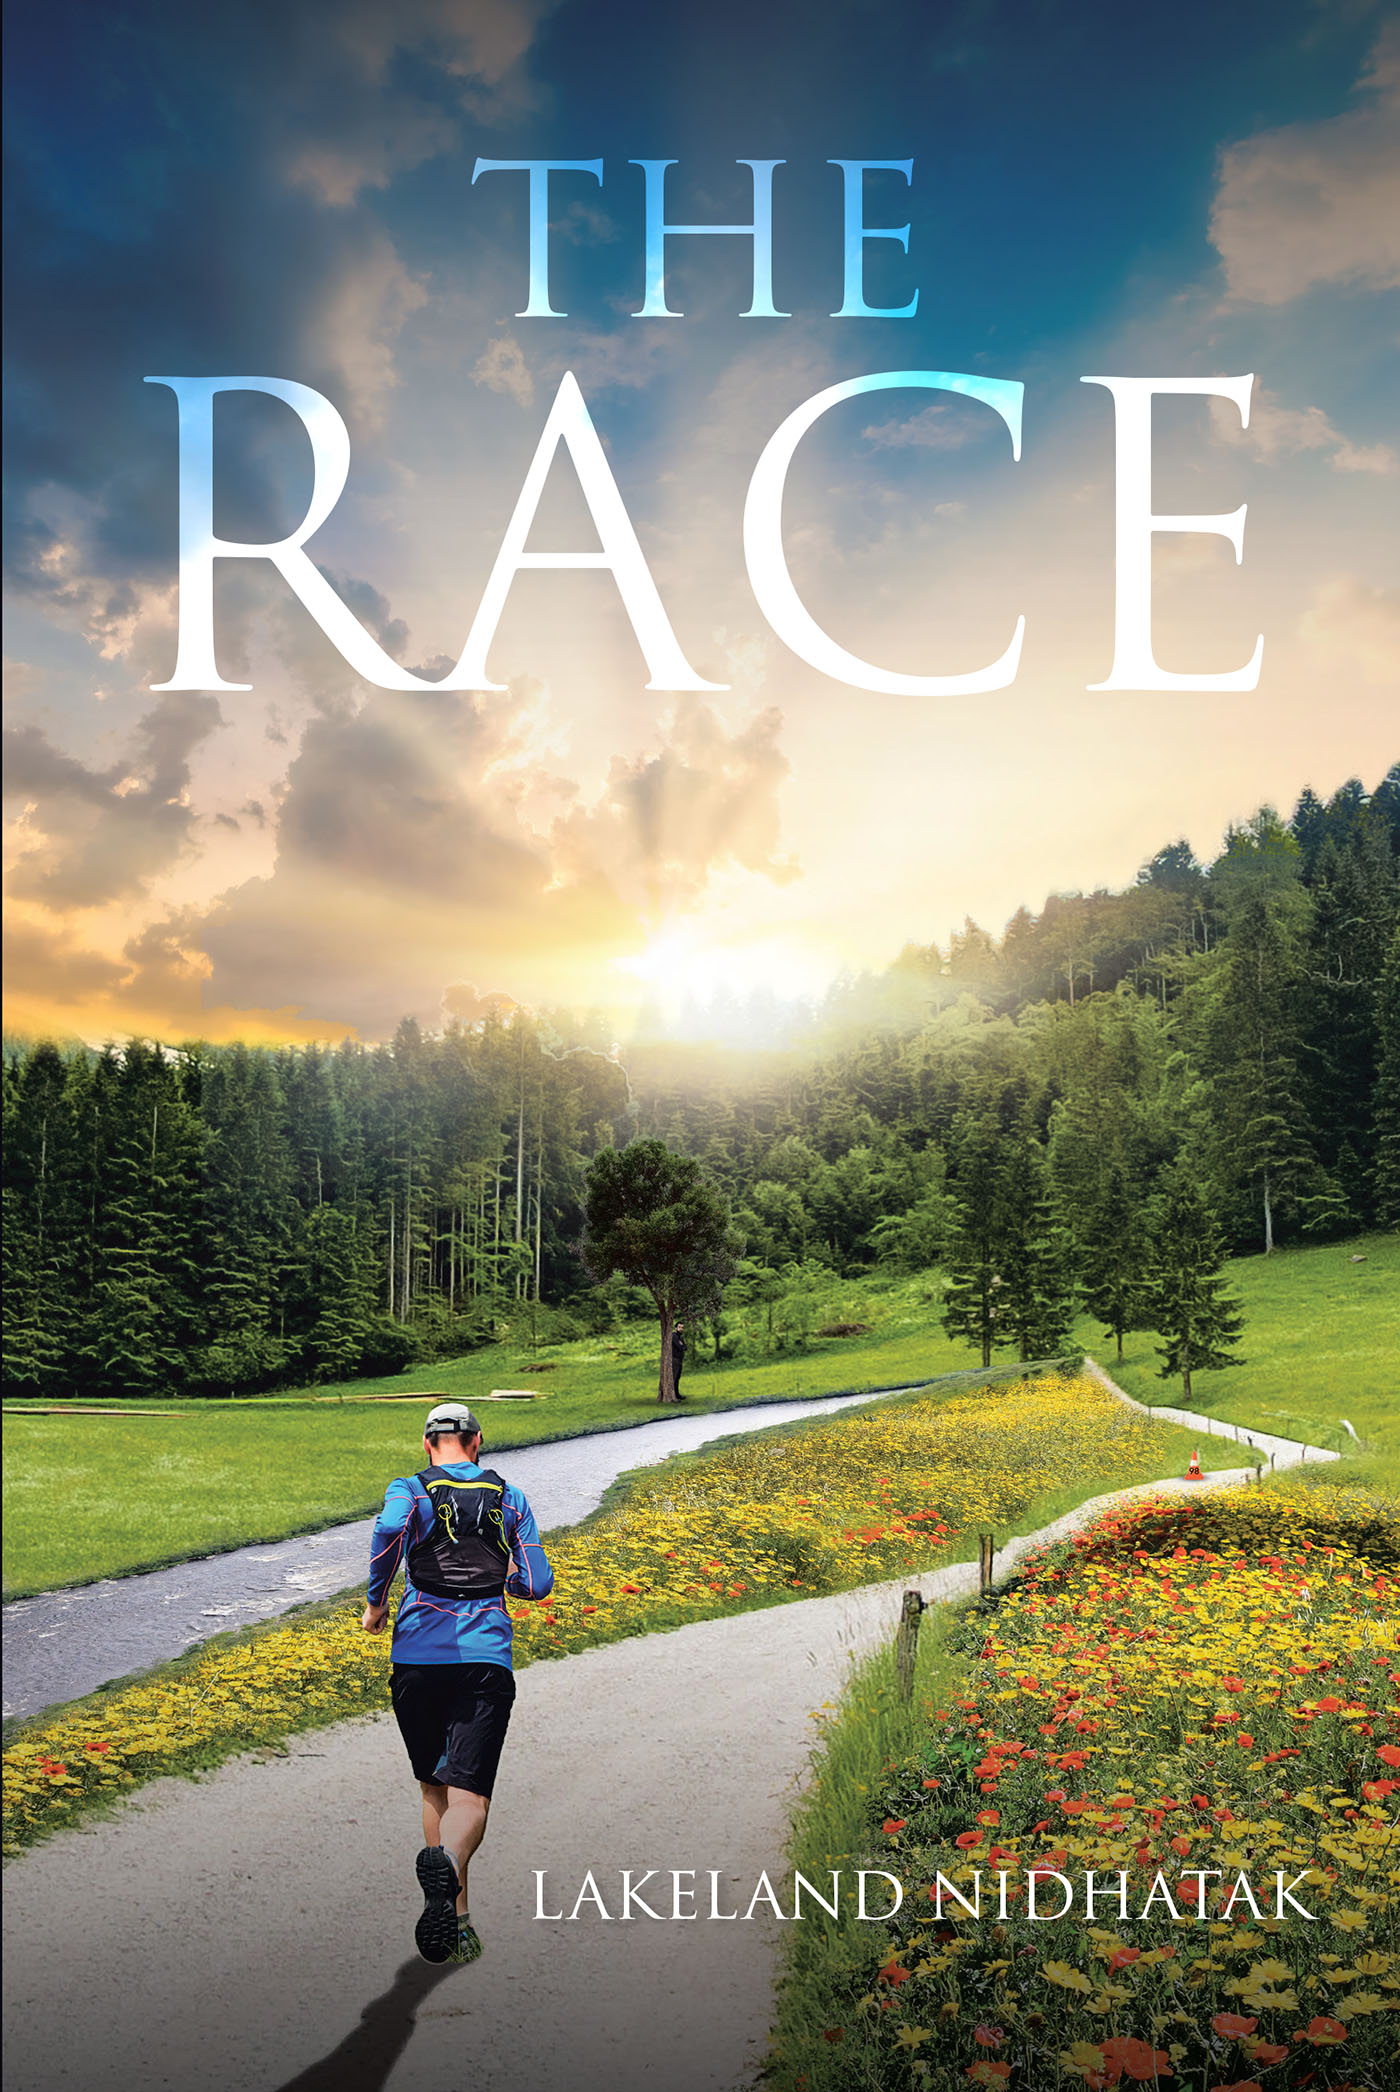 Lakeland Nidhatak’s Newly Released "The Race" is a Compelling Fiction That Finds Unexpected Dangers Lurking During a Relay Race